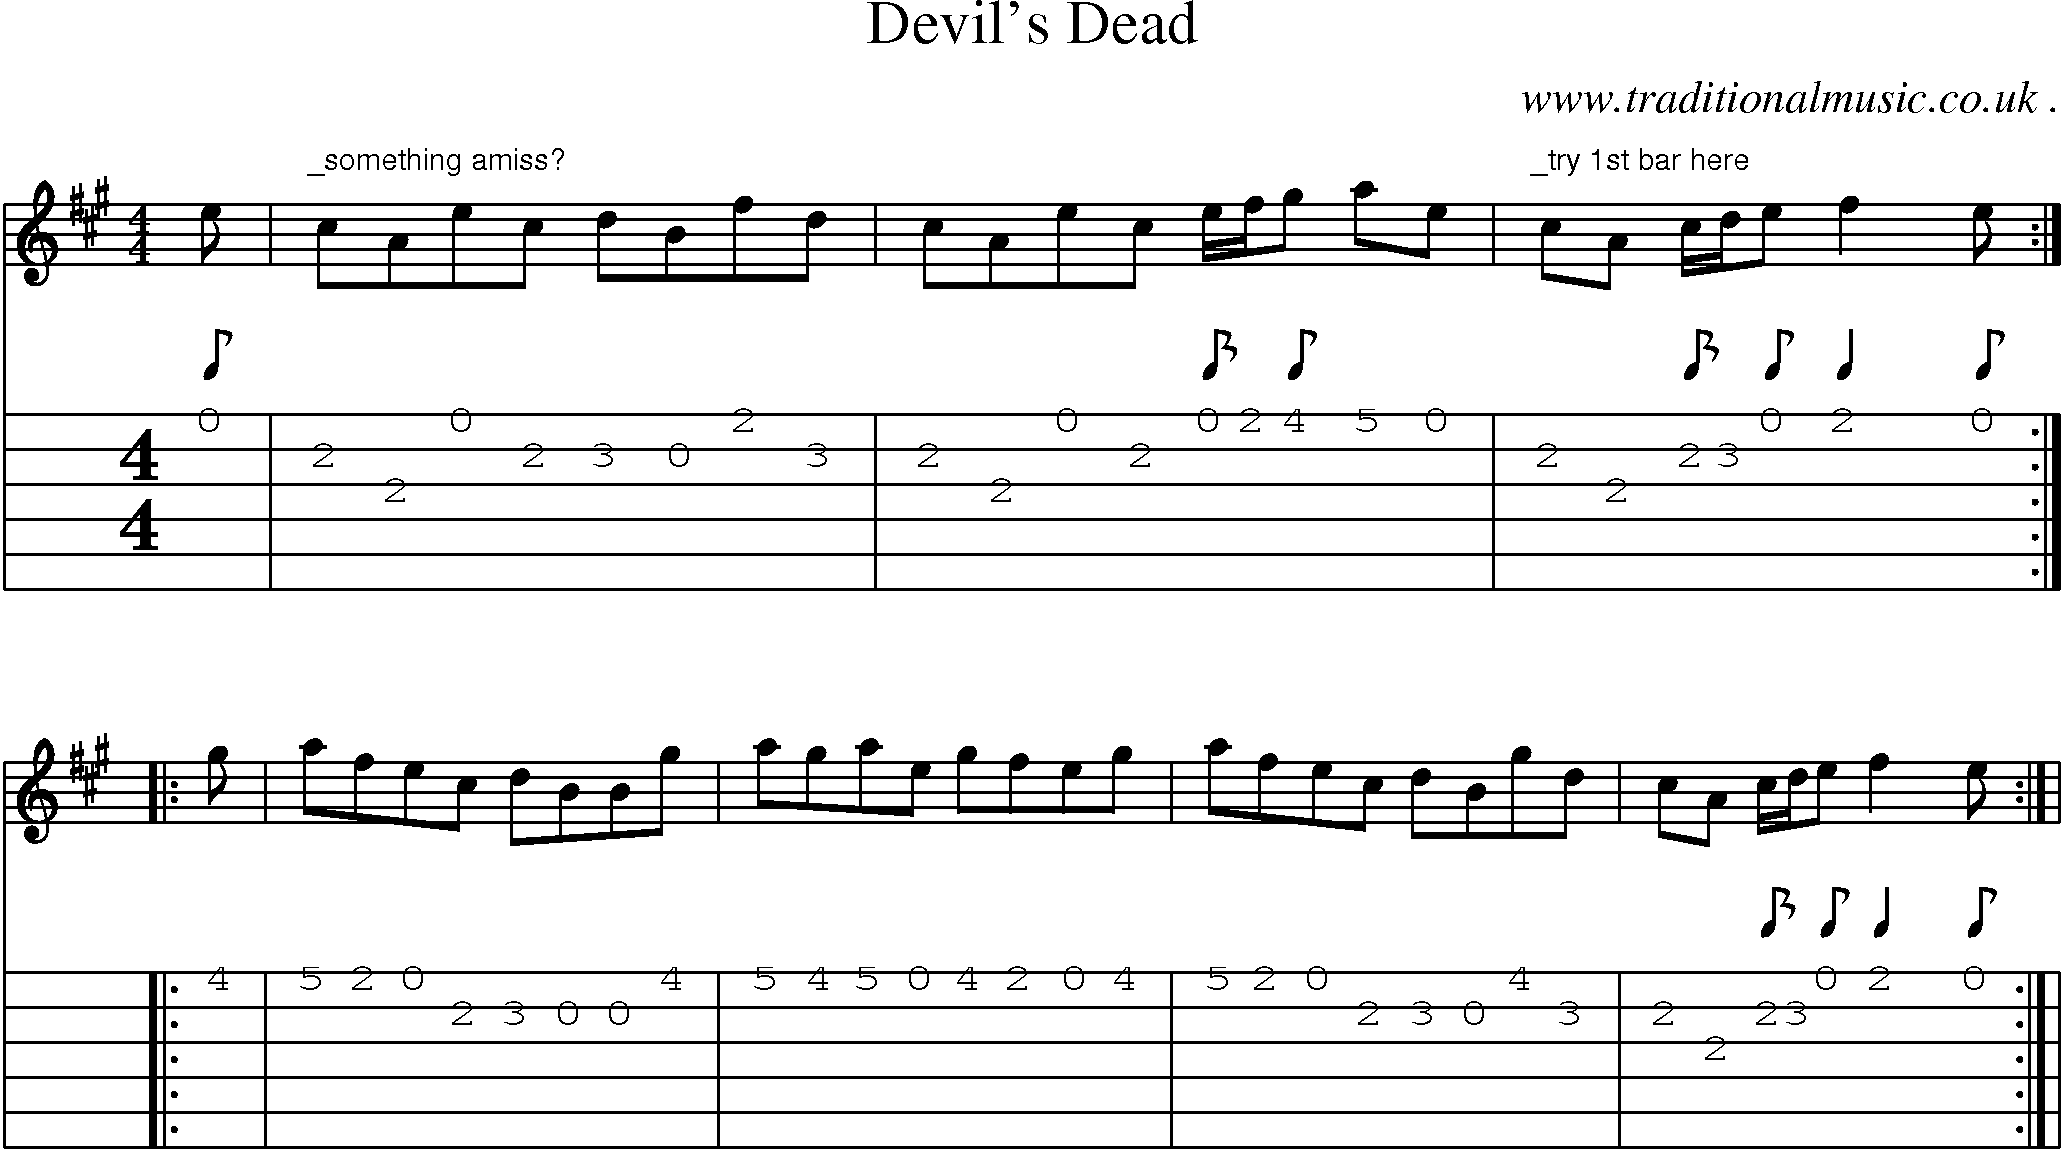 Sheet-Music and Guitar Tabs for Devils Dead